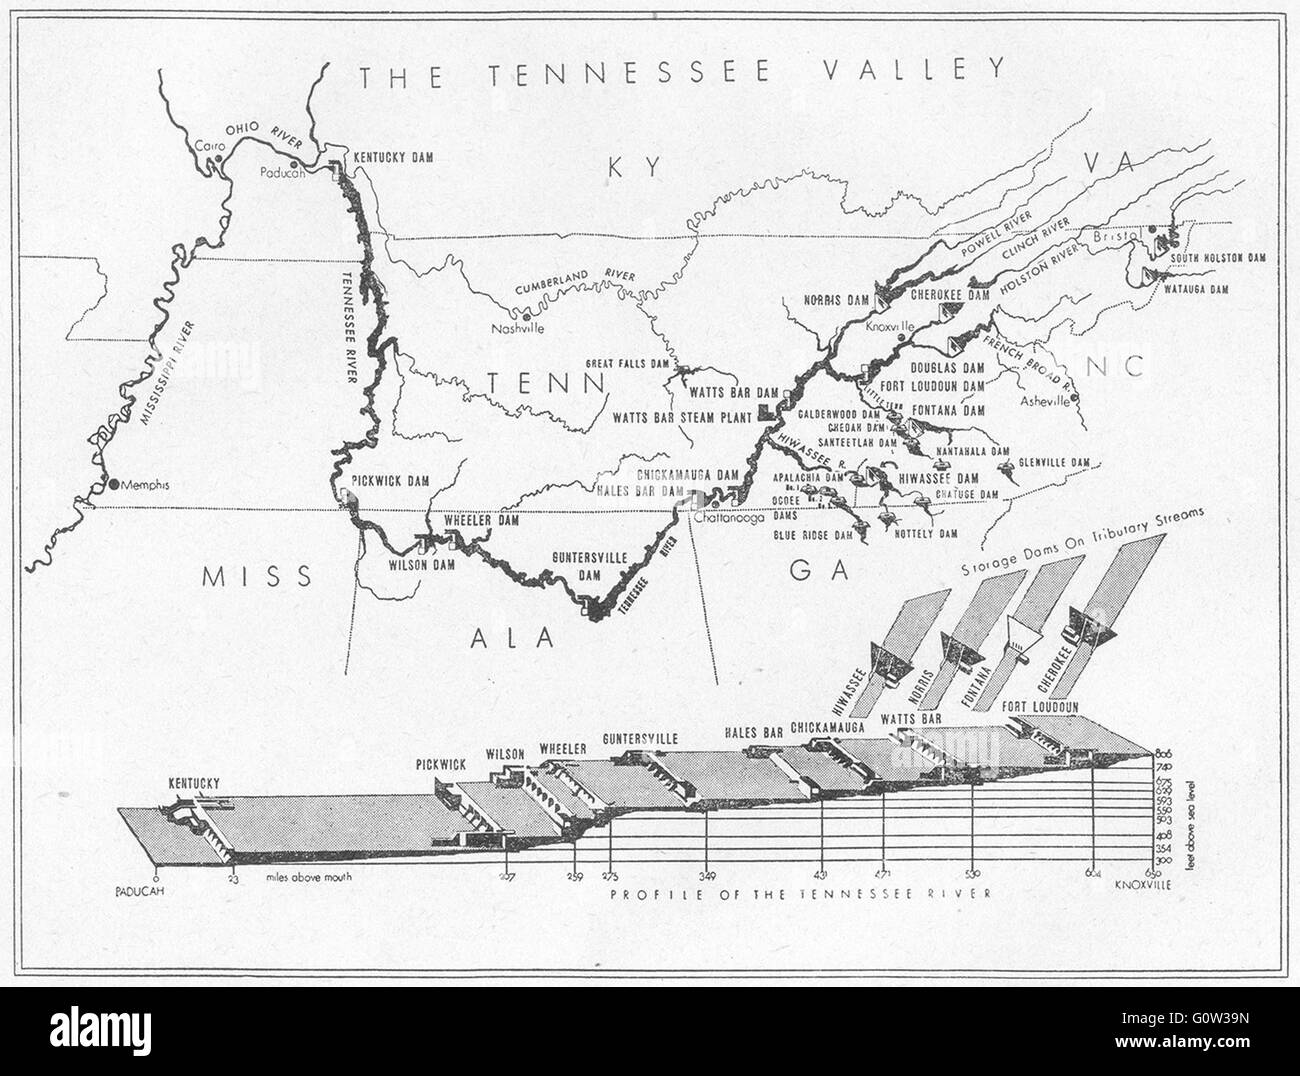 TENNESSEE: The new deal, 1933: The Tennessee Valley, sketch map, 1942 Stock Photo